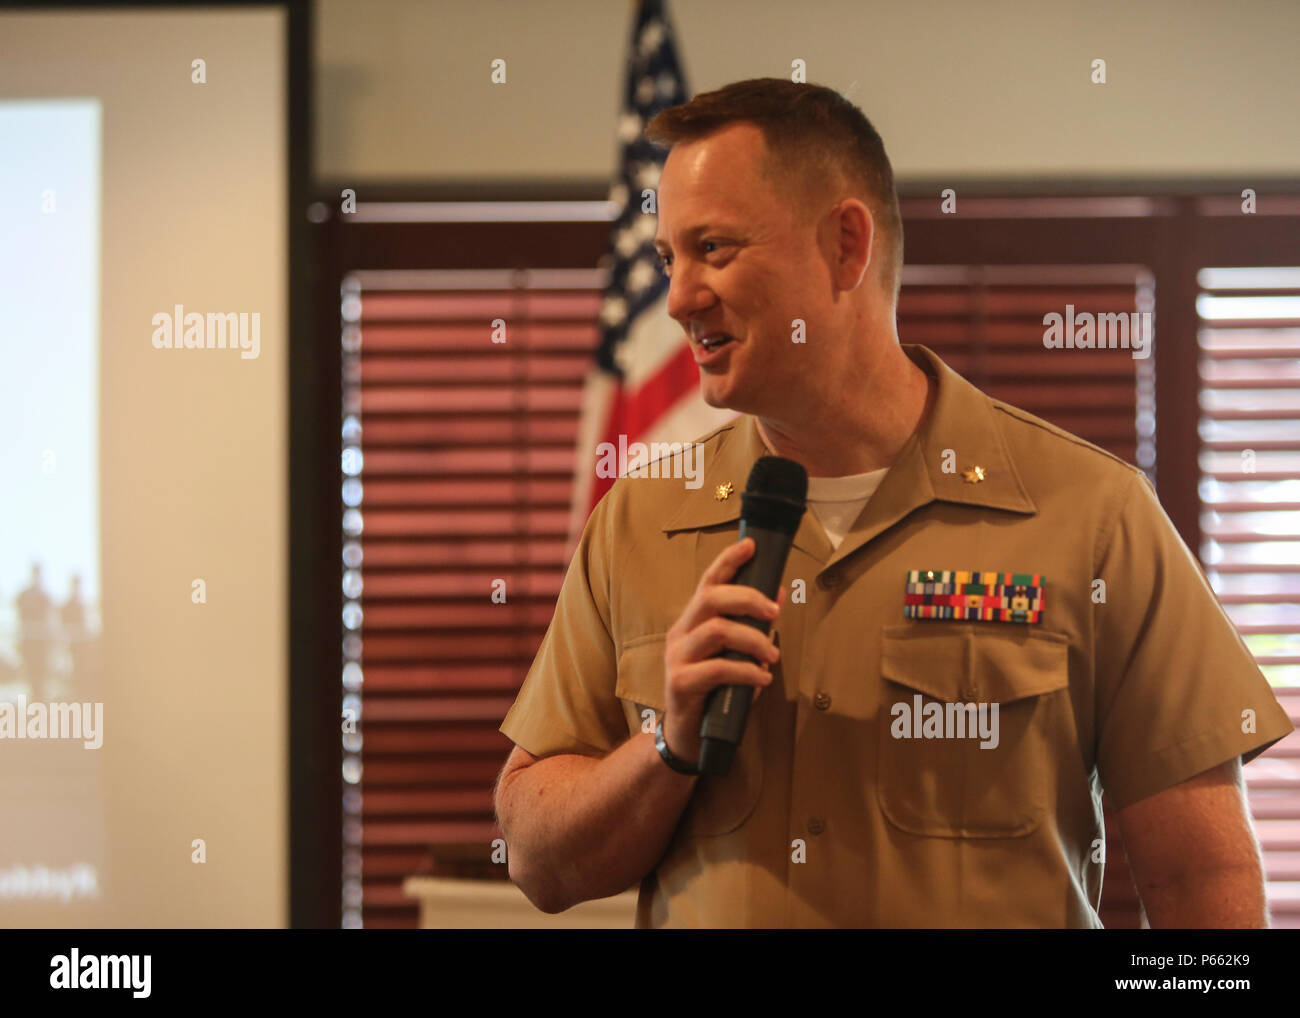 Maj. Andre LaTaste, the Marine Forces Command programing officer, speaks to the Port Everglades Association during a Fleet Week luncheon, May 6, 2016. Fleet Week, which takes place in Fort Lauderdale, Fla., from May 2-8, will give the community of South Florida the opportunity to interact with the Marines and Sailors of the ship as well as see up-close and personal some of the capabilities and equipment the Marine Corps employs. (U.S. Marine Corps photo by Cpl. Michelle Reif/Released.) Stock Photo